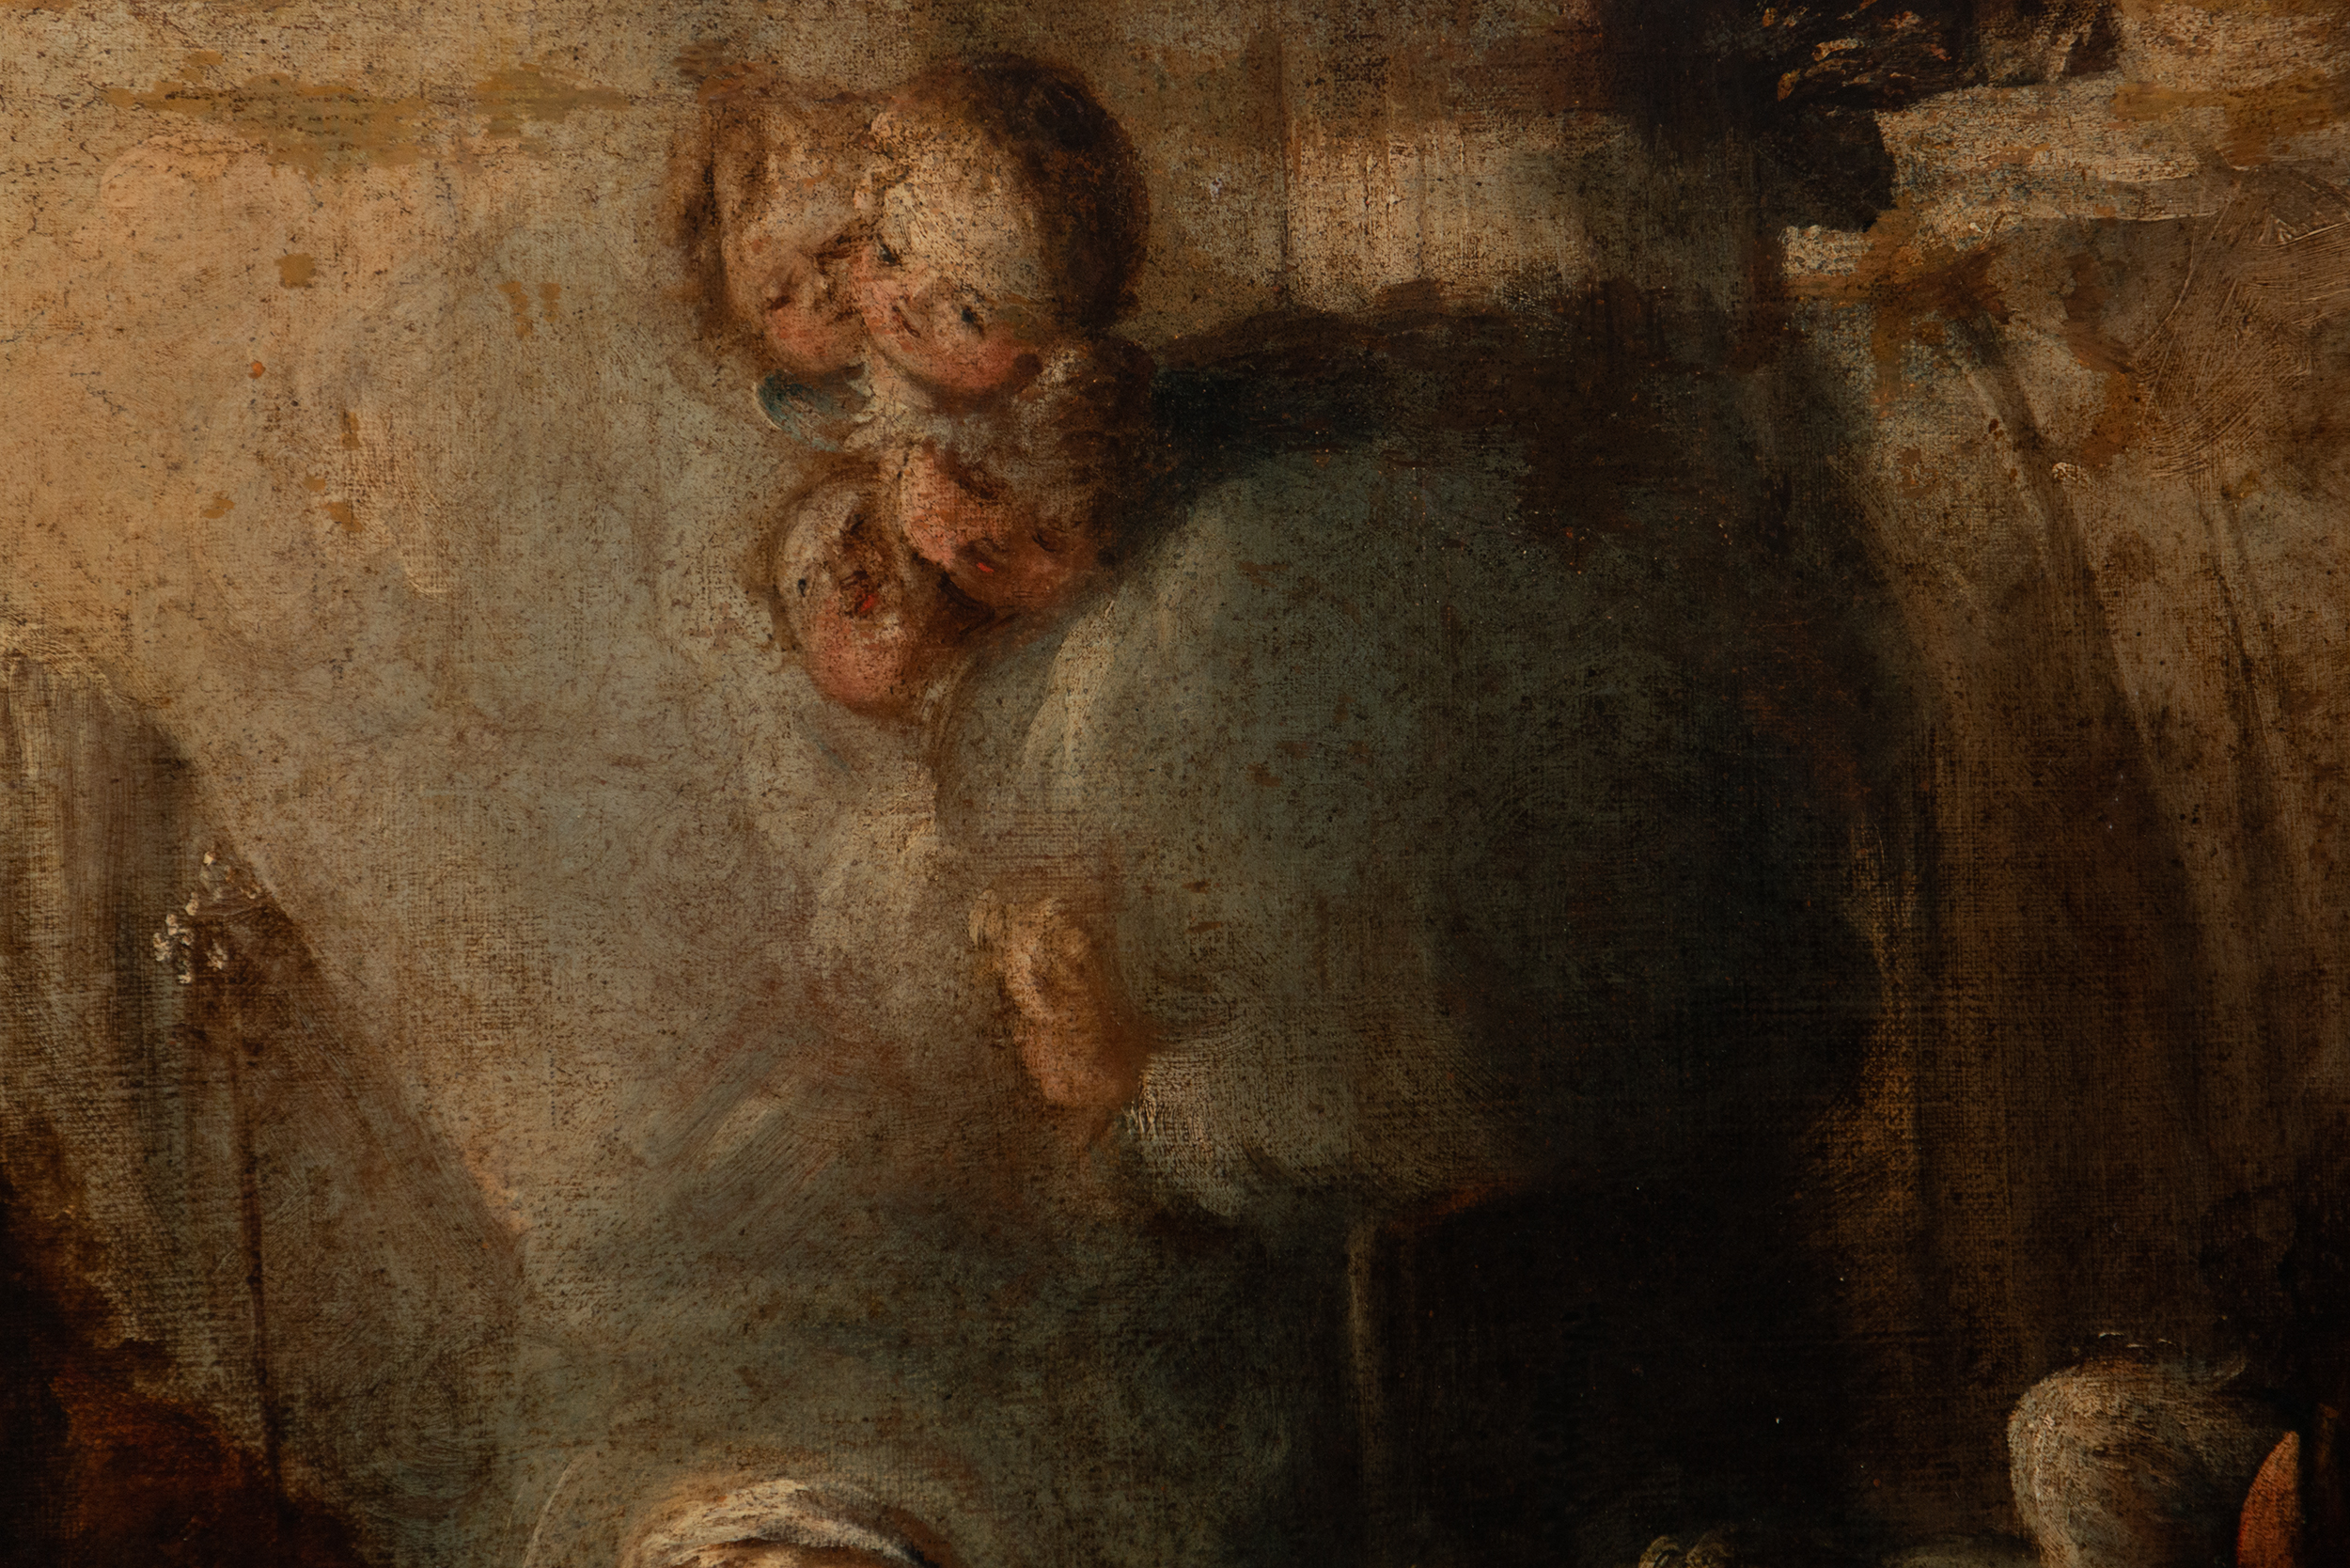 Adoration of the Shepherds, Italian school of the 17th century - Image 3 of 9